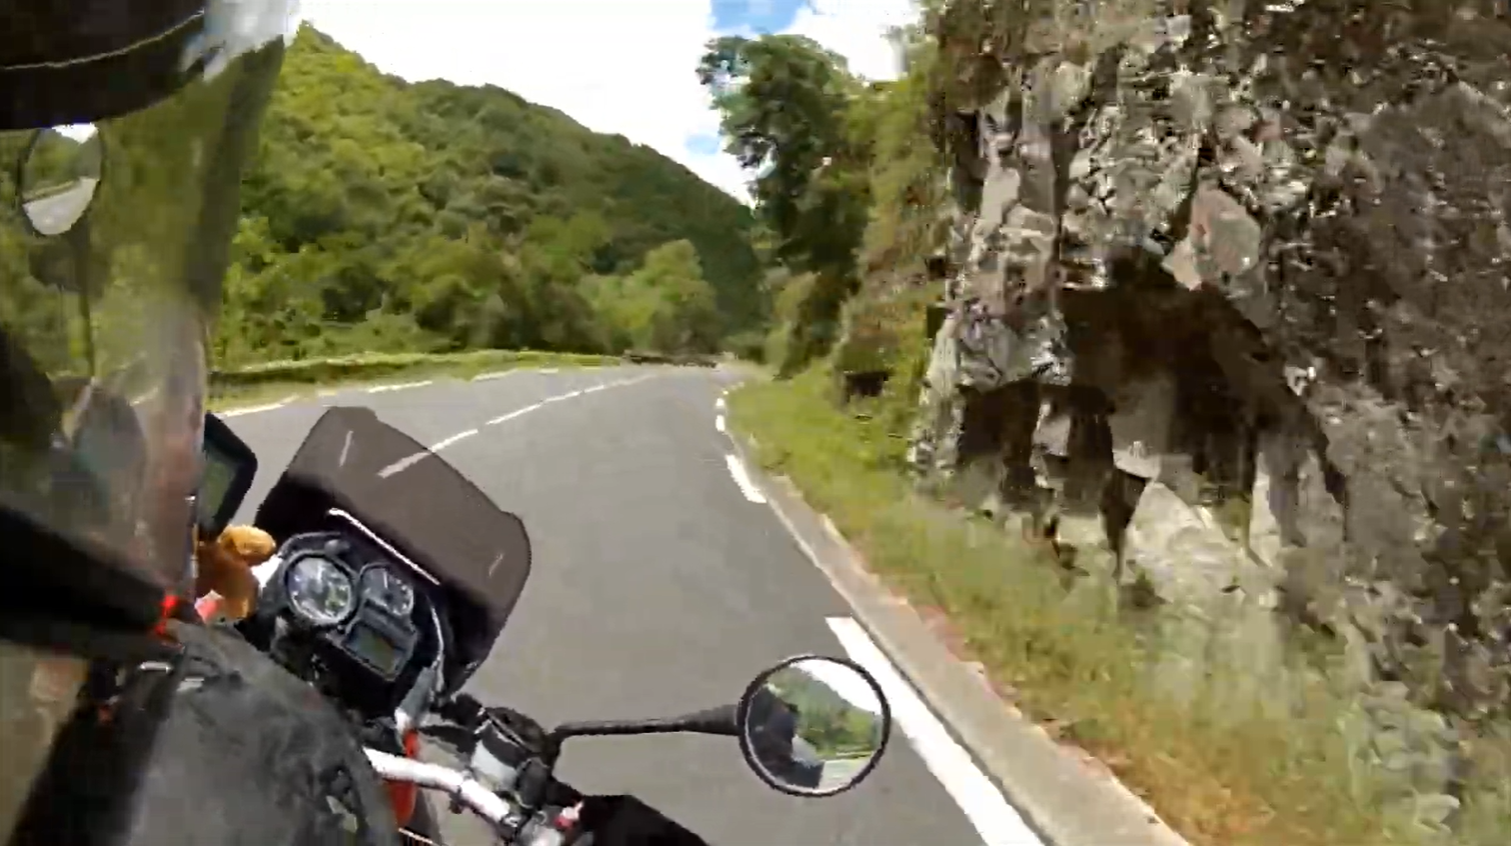 Load video: Rikki in the south of France